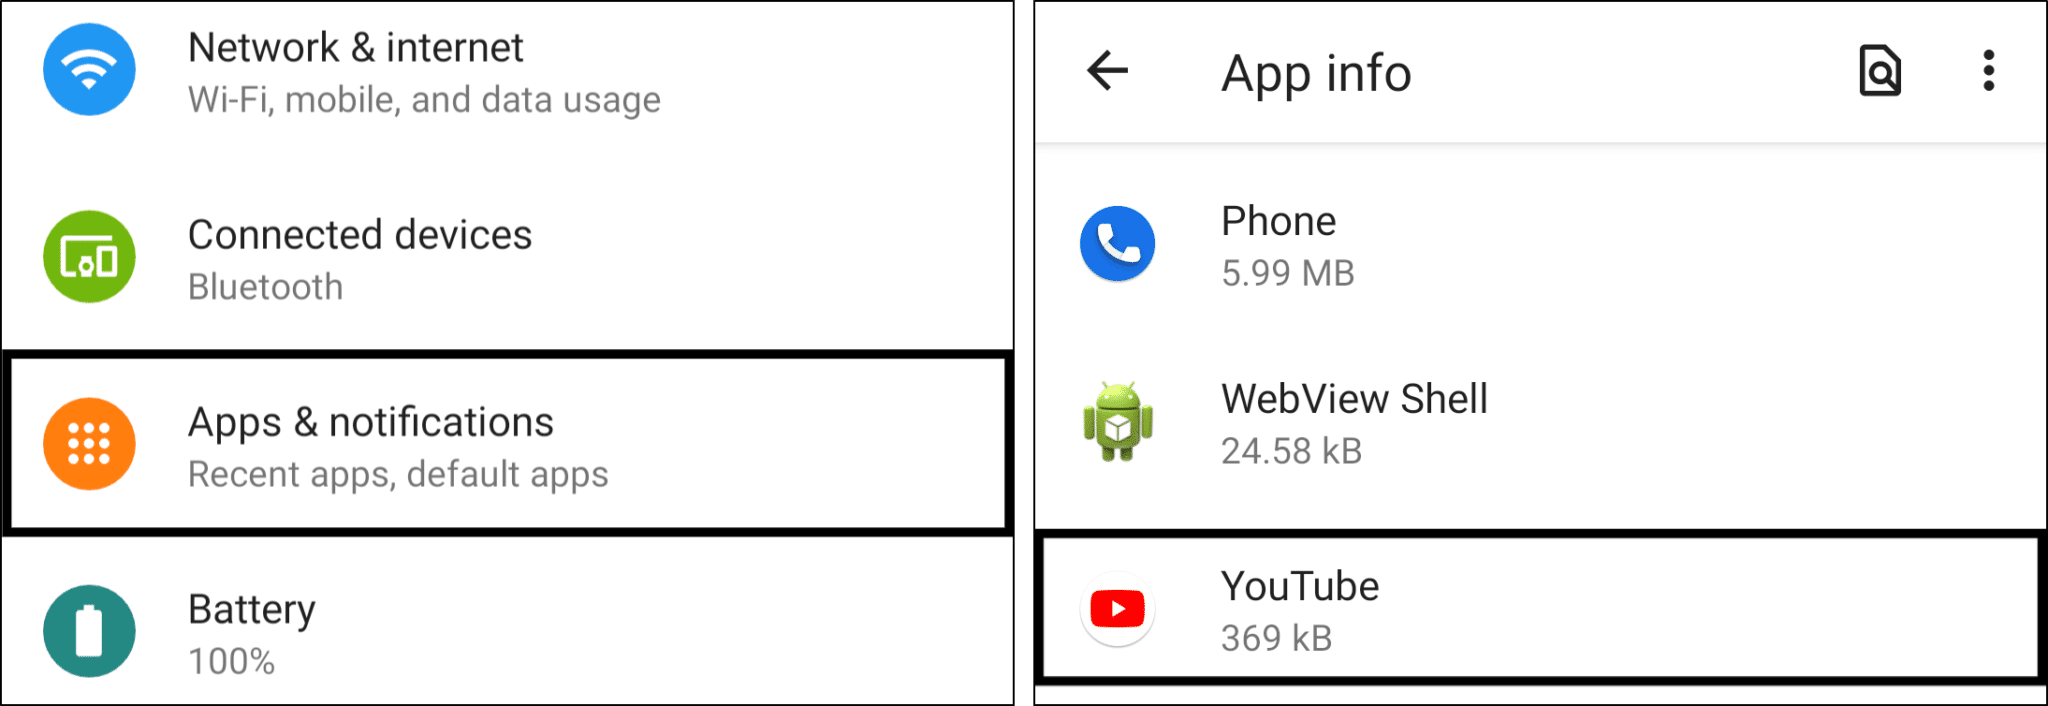 access YouTube app settings in system settings on Android to allow notification settings to fix YouTube notifications not working